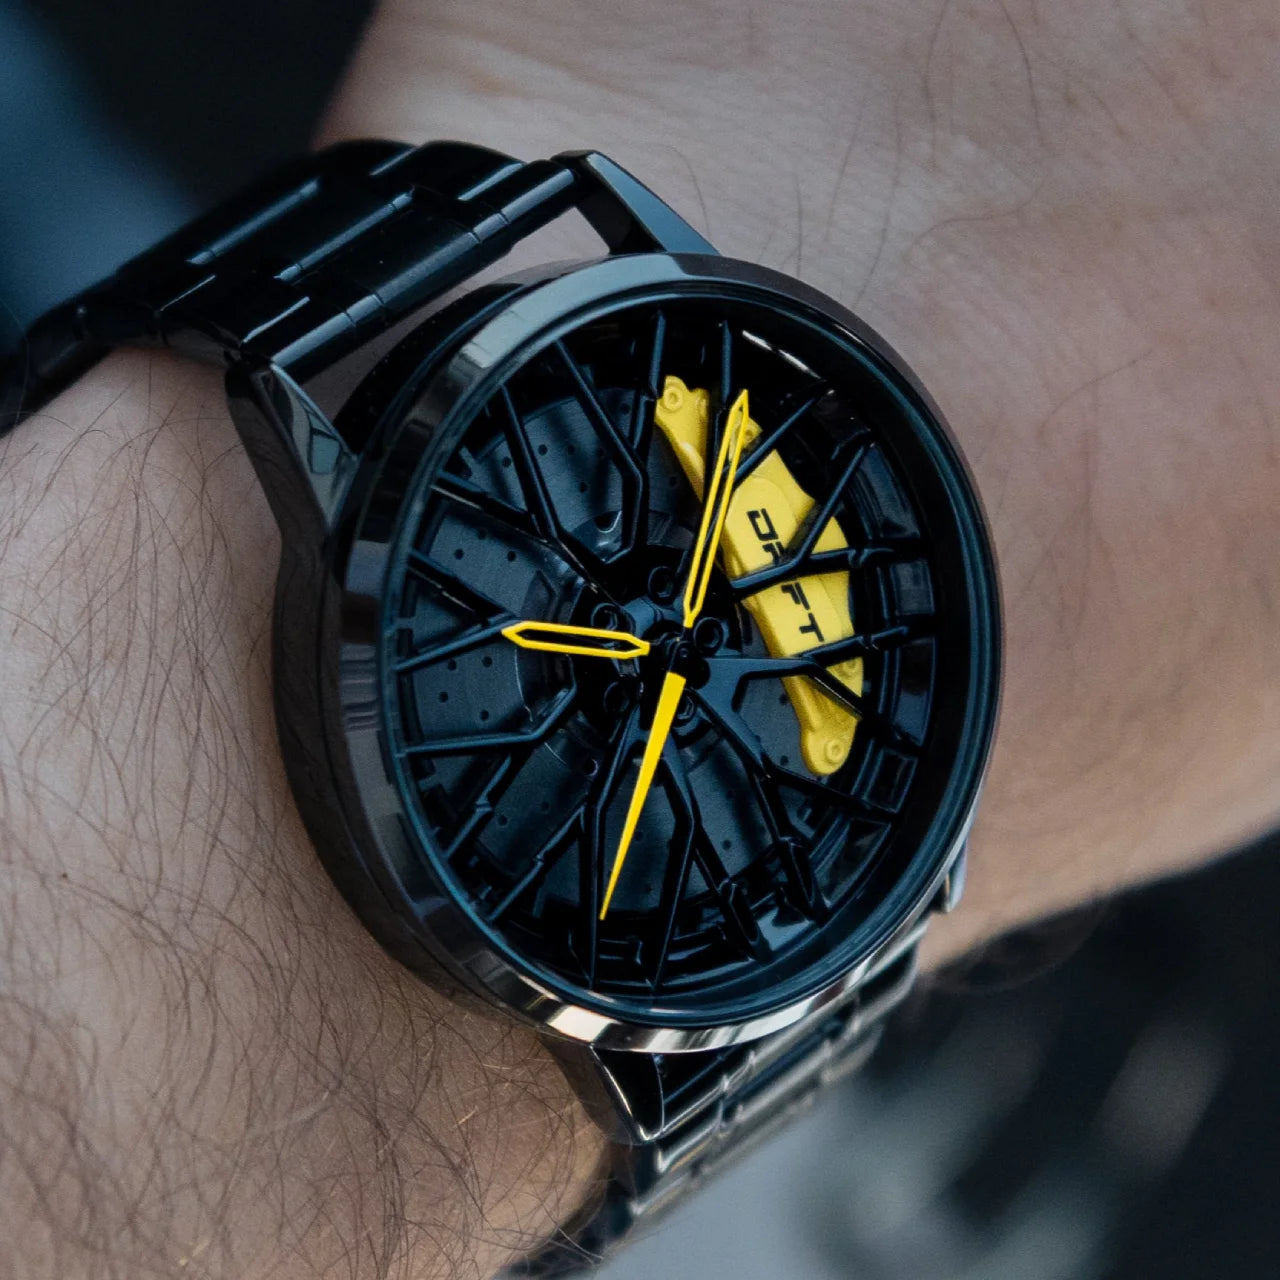 Elevate your style with our innovative yellow Motorsport Rim Watch. Crafted by a young German startup, these precision timepieces are designed for motorsport and tuning enthusiasts, as well as auto aficionados. Ignite your passion now! #id_46744363073866